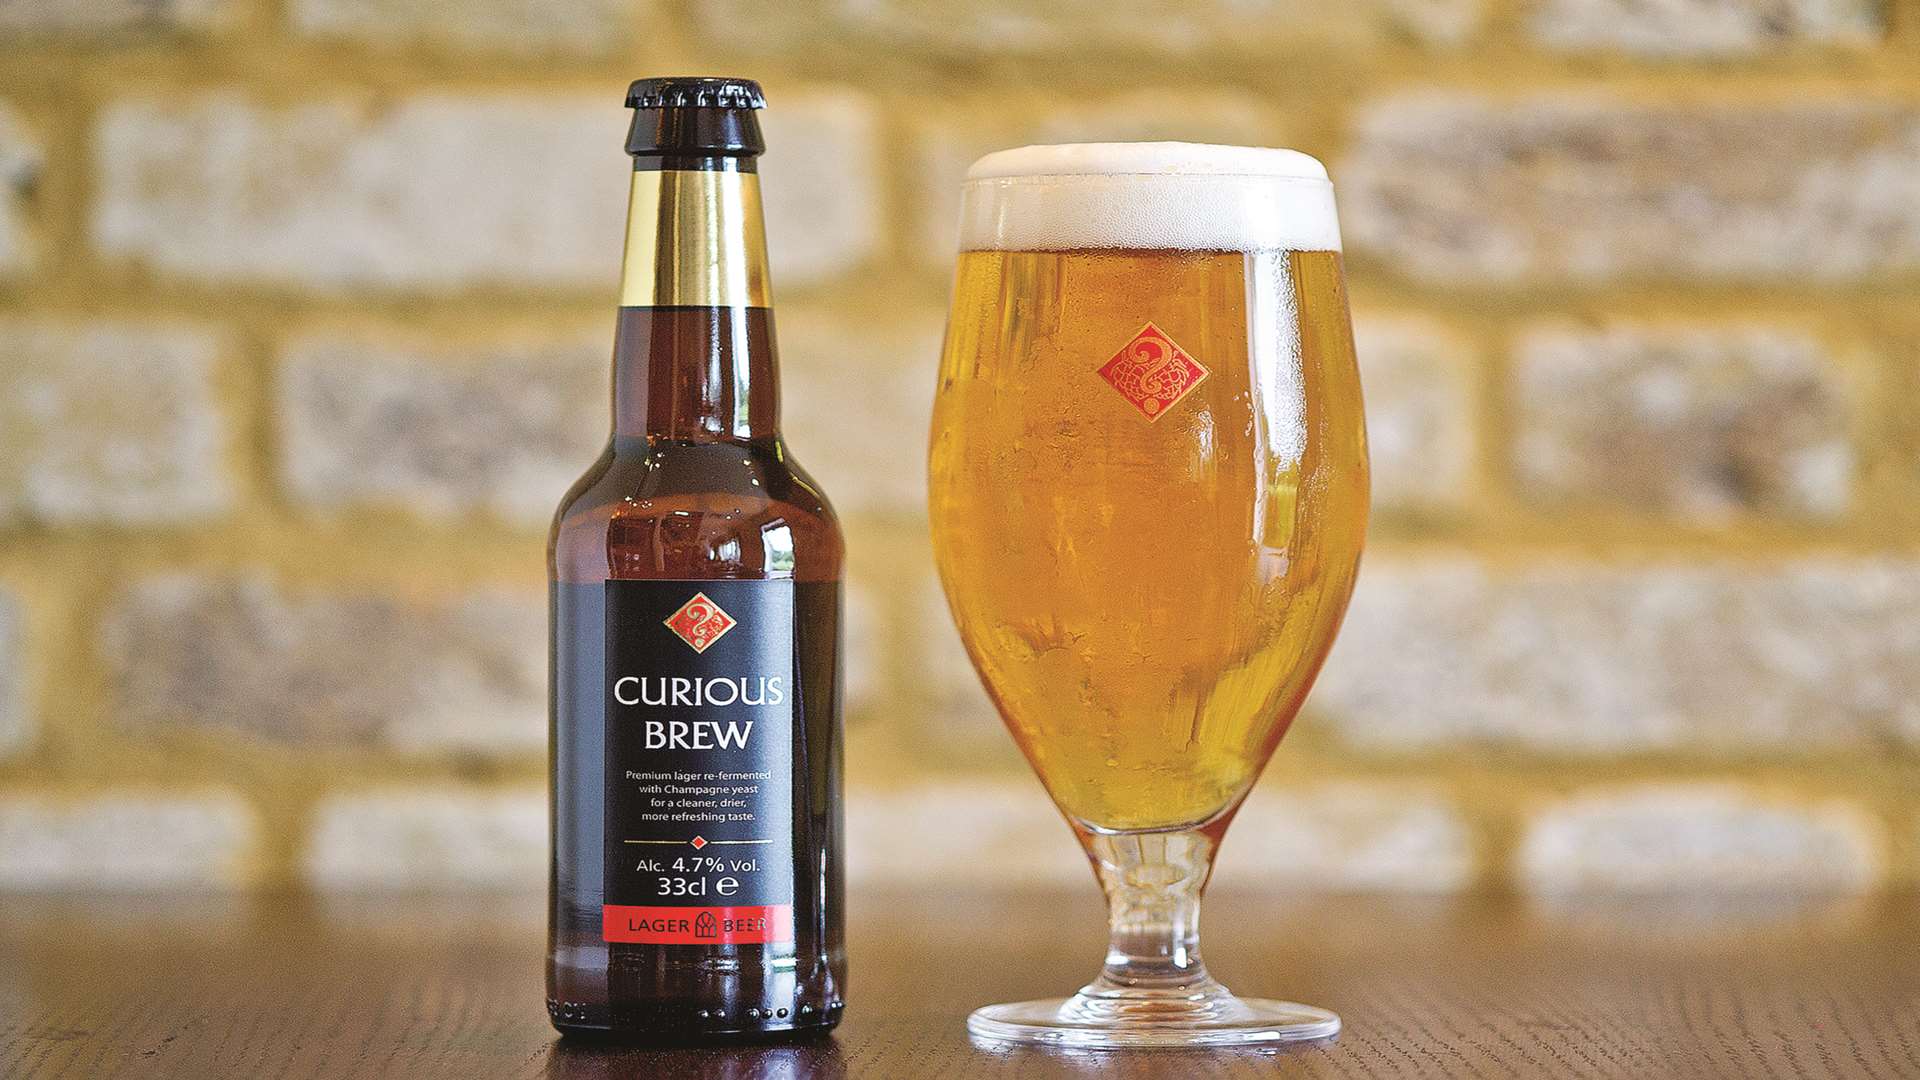 Chapel Down sells its Curious Brew drinks in high-end restaurants, bars and hotels, with sales growing by about 40% each year